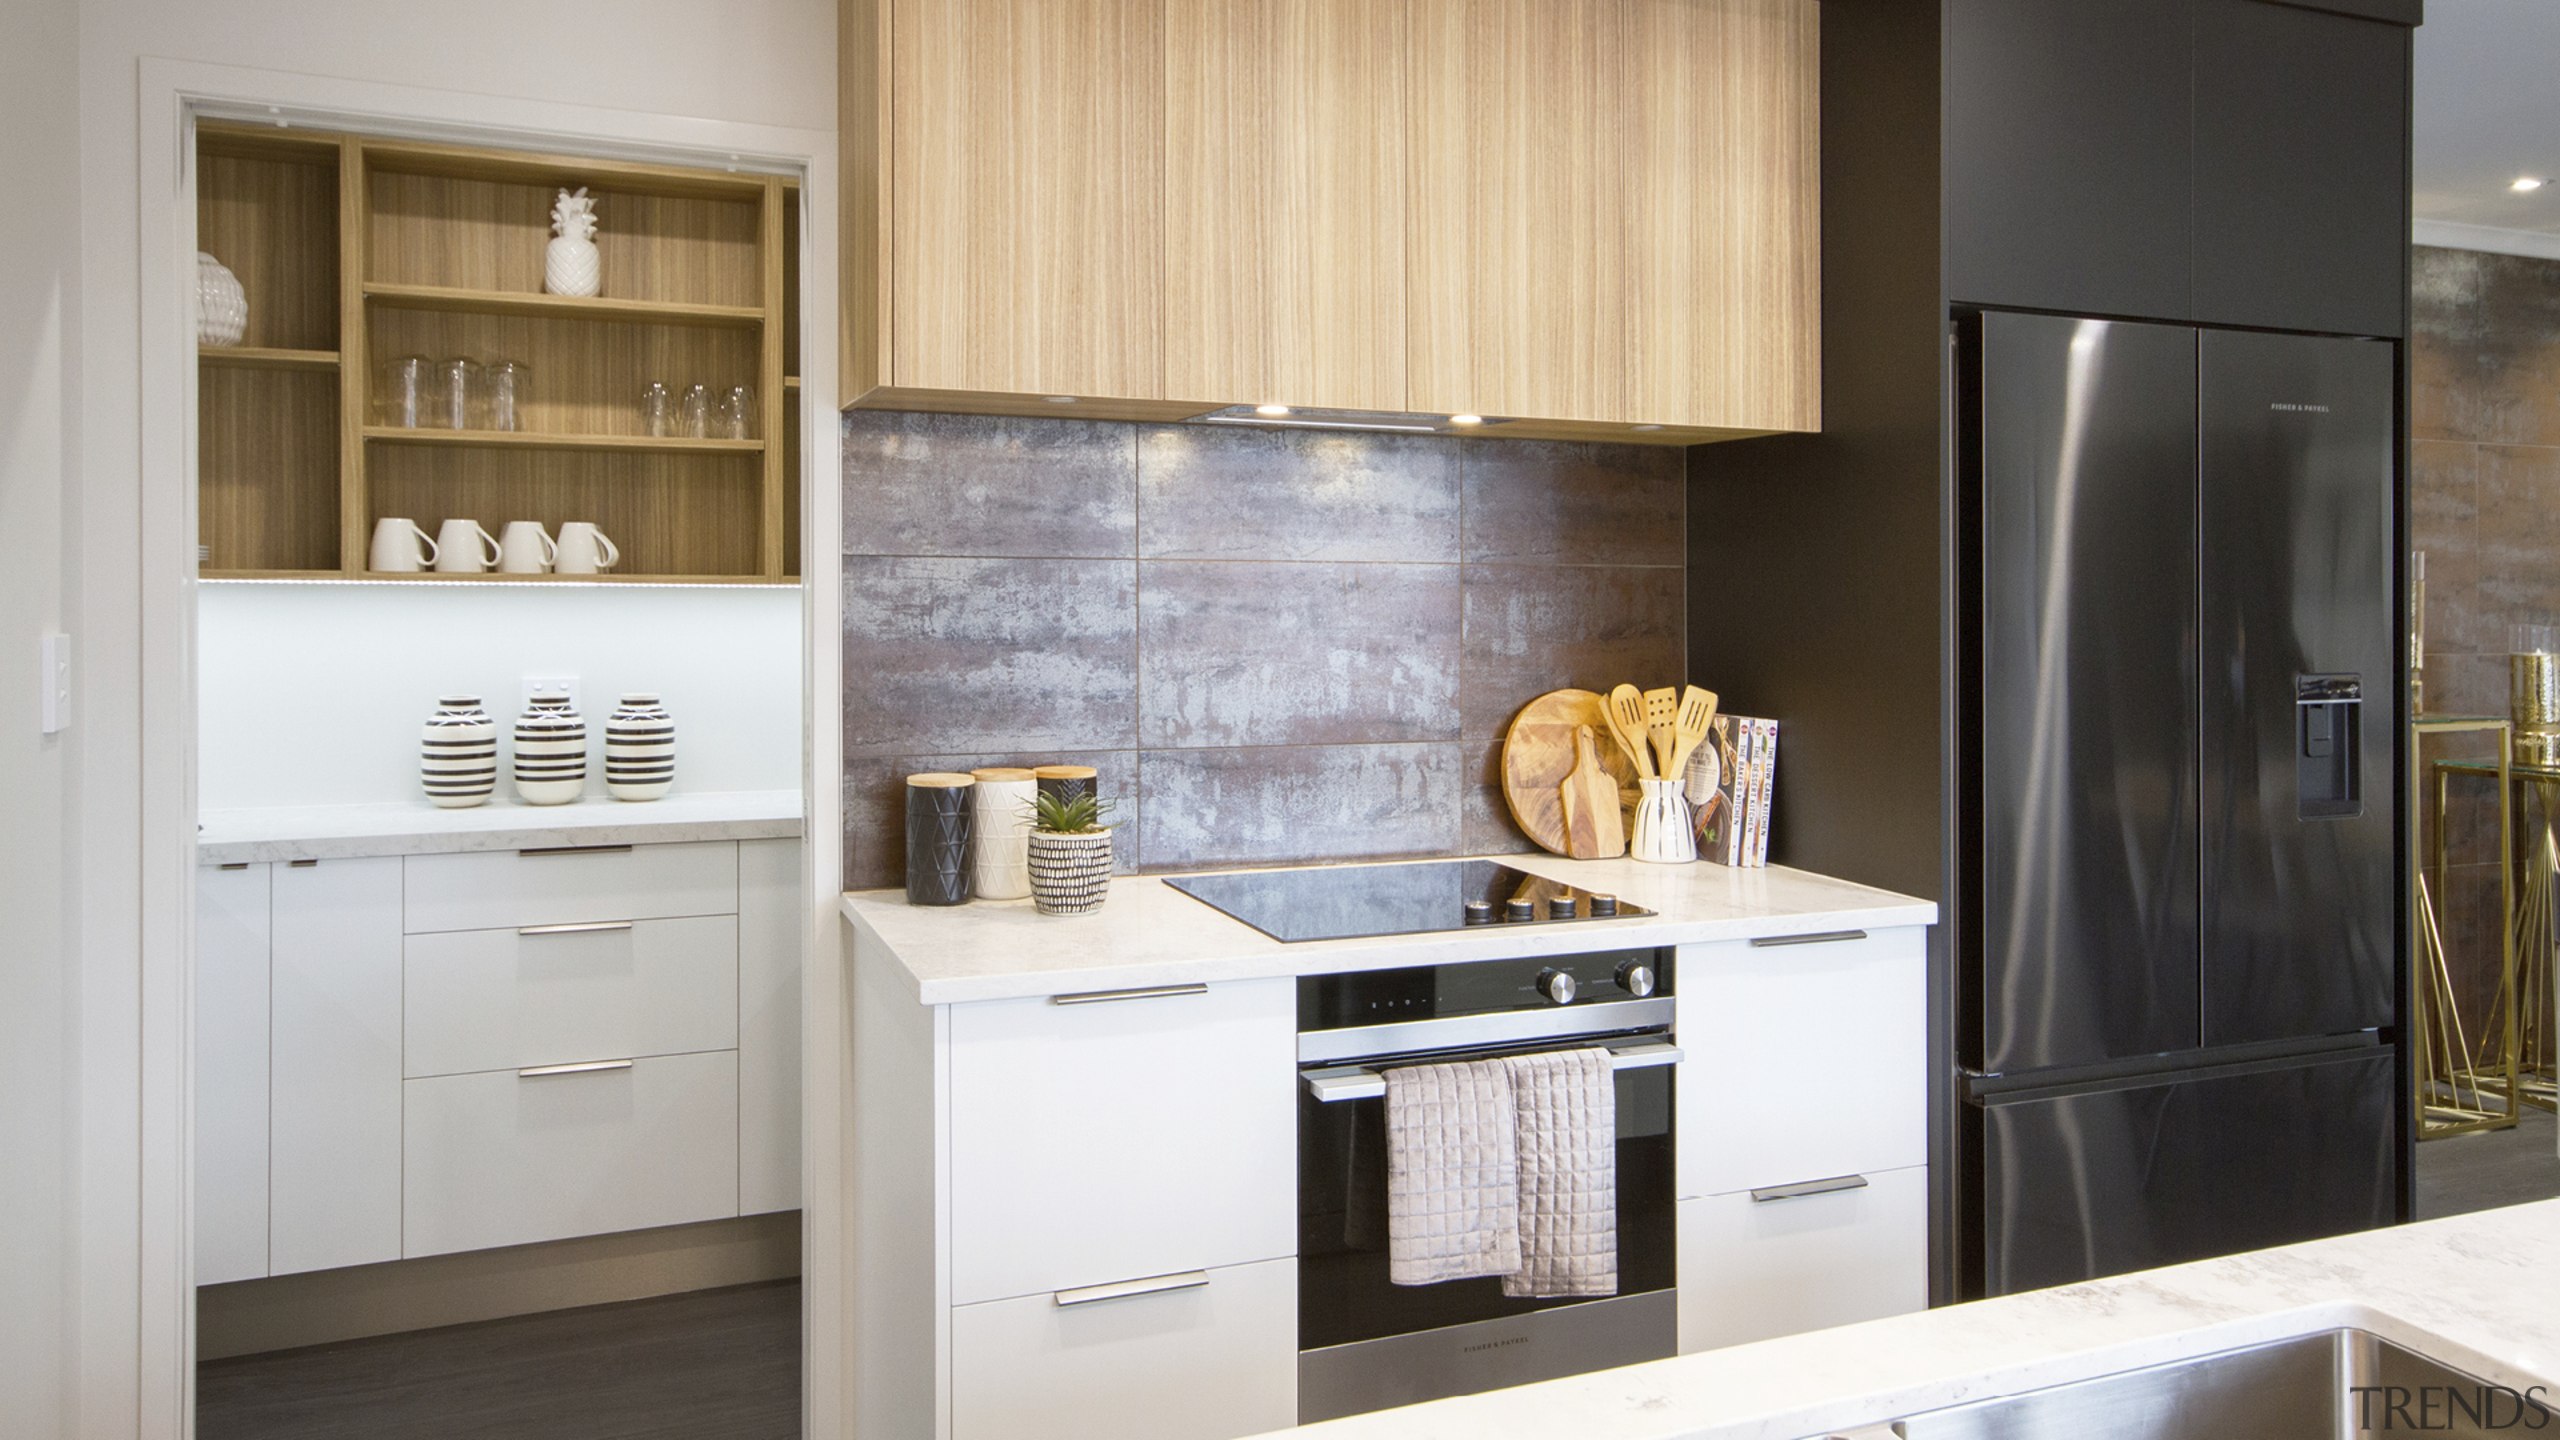 The kitchen's attractive grained wood and white cabinetry 